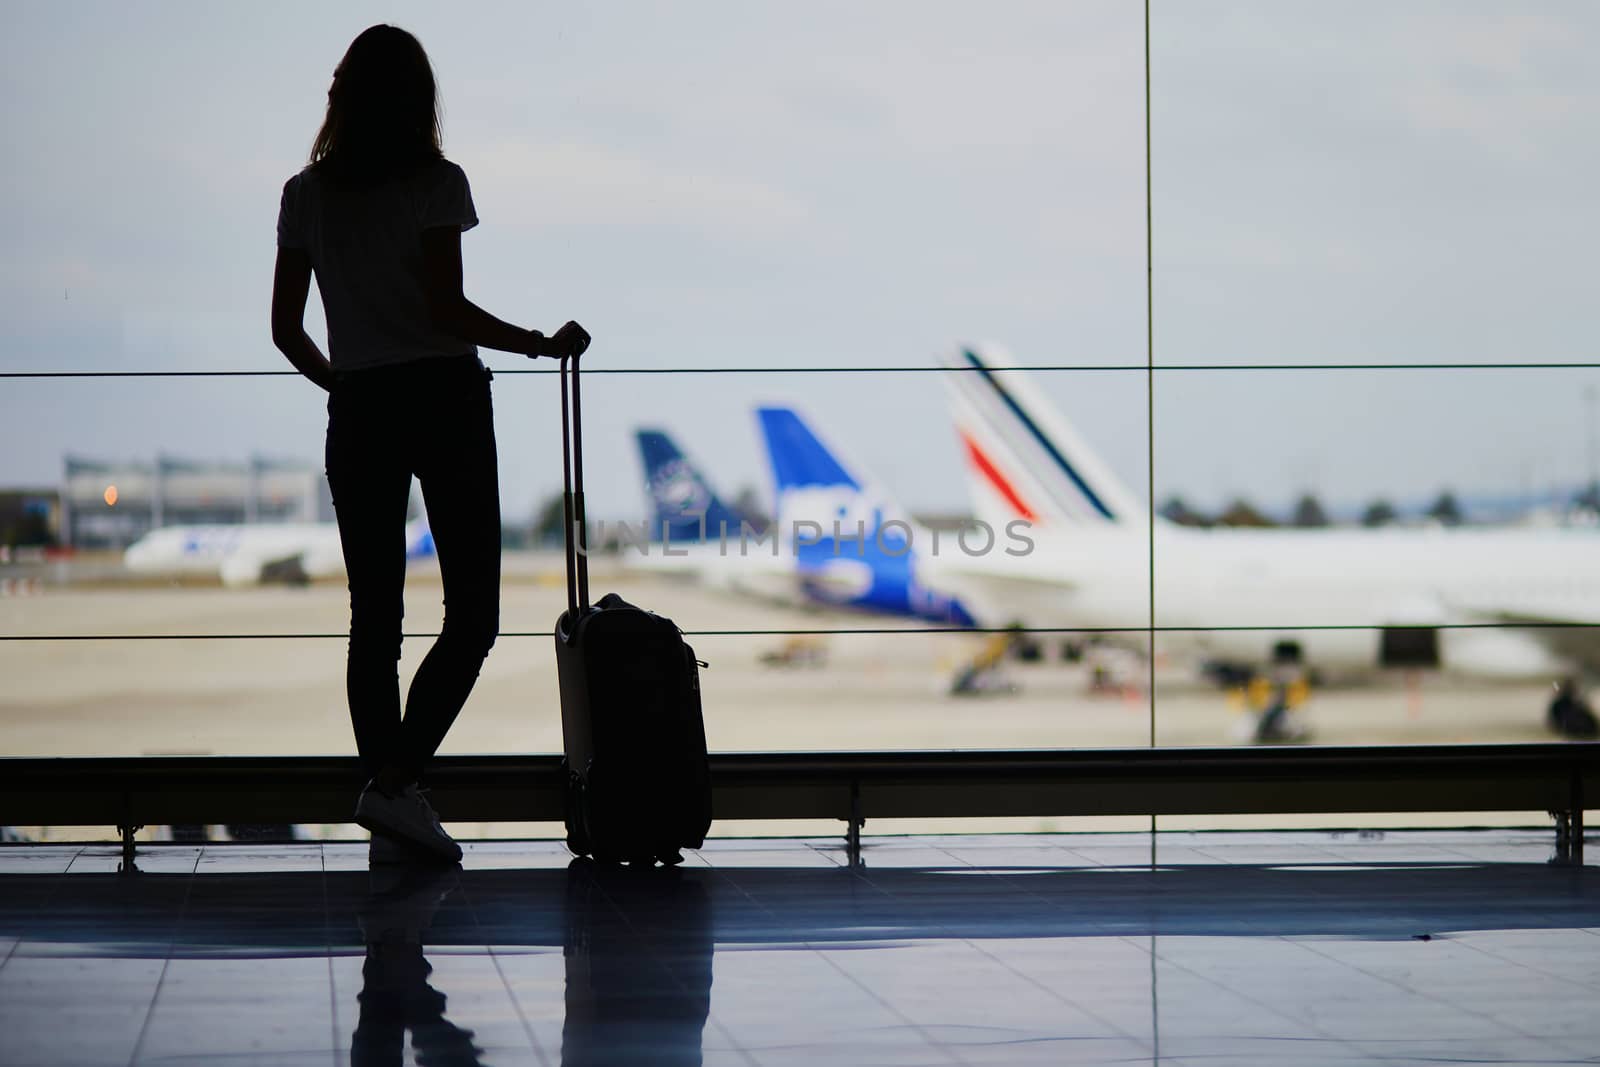 Silhouette of young woman in international airport, looking through the window at planes